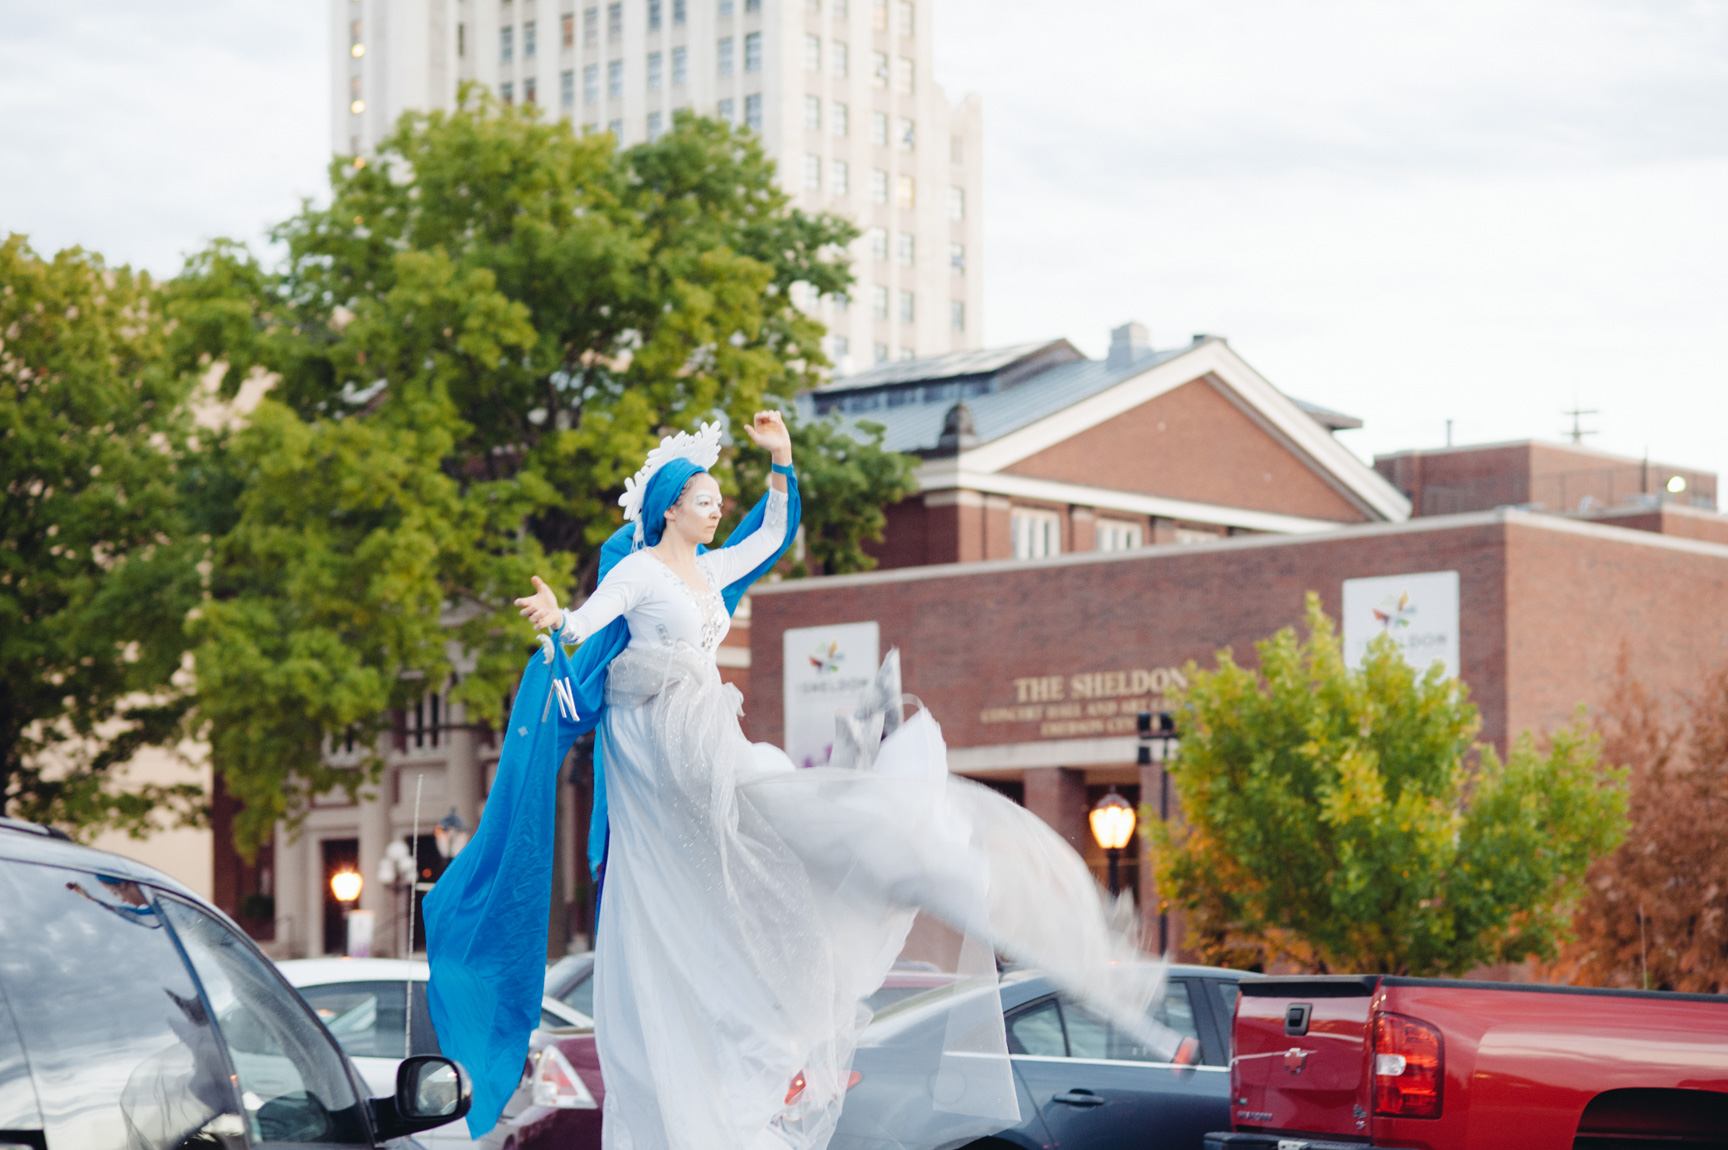 A performer dances on stilts outside, wearing a flowy white dress and a long blue scarf.